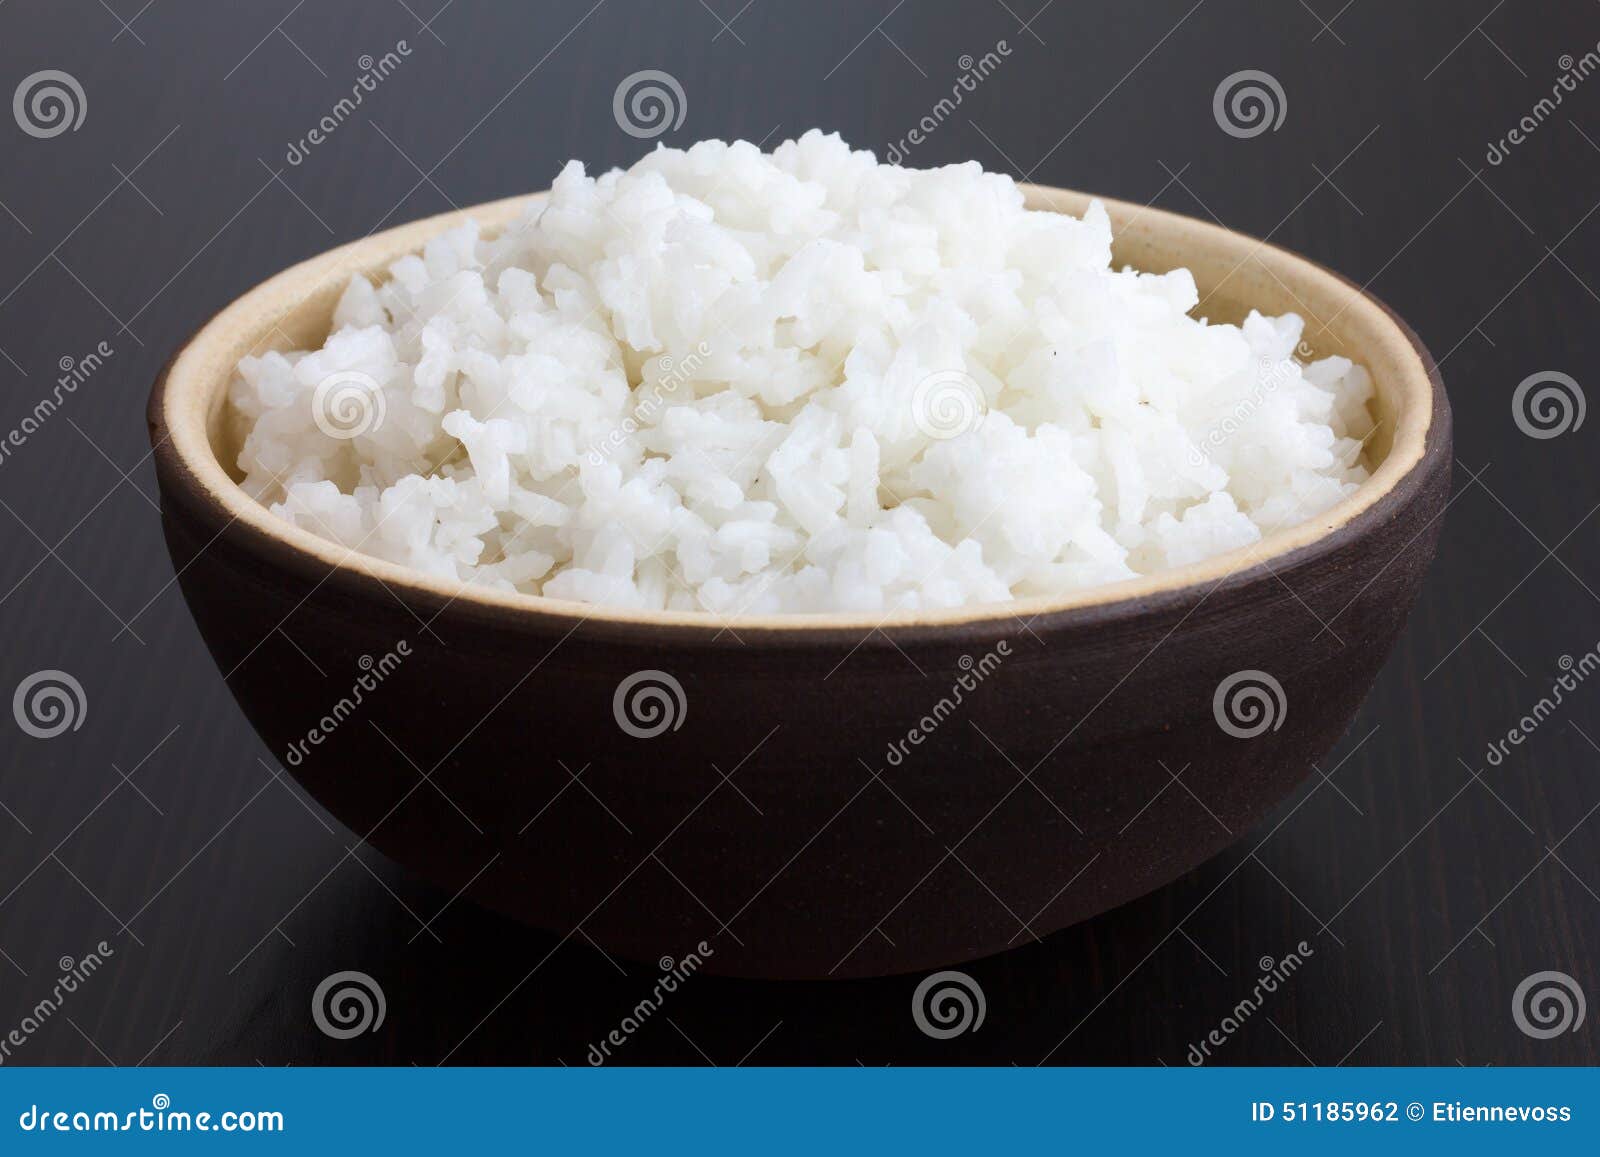 rustic bowl of cooked white rice on dark surface